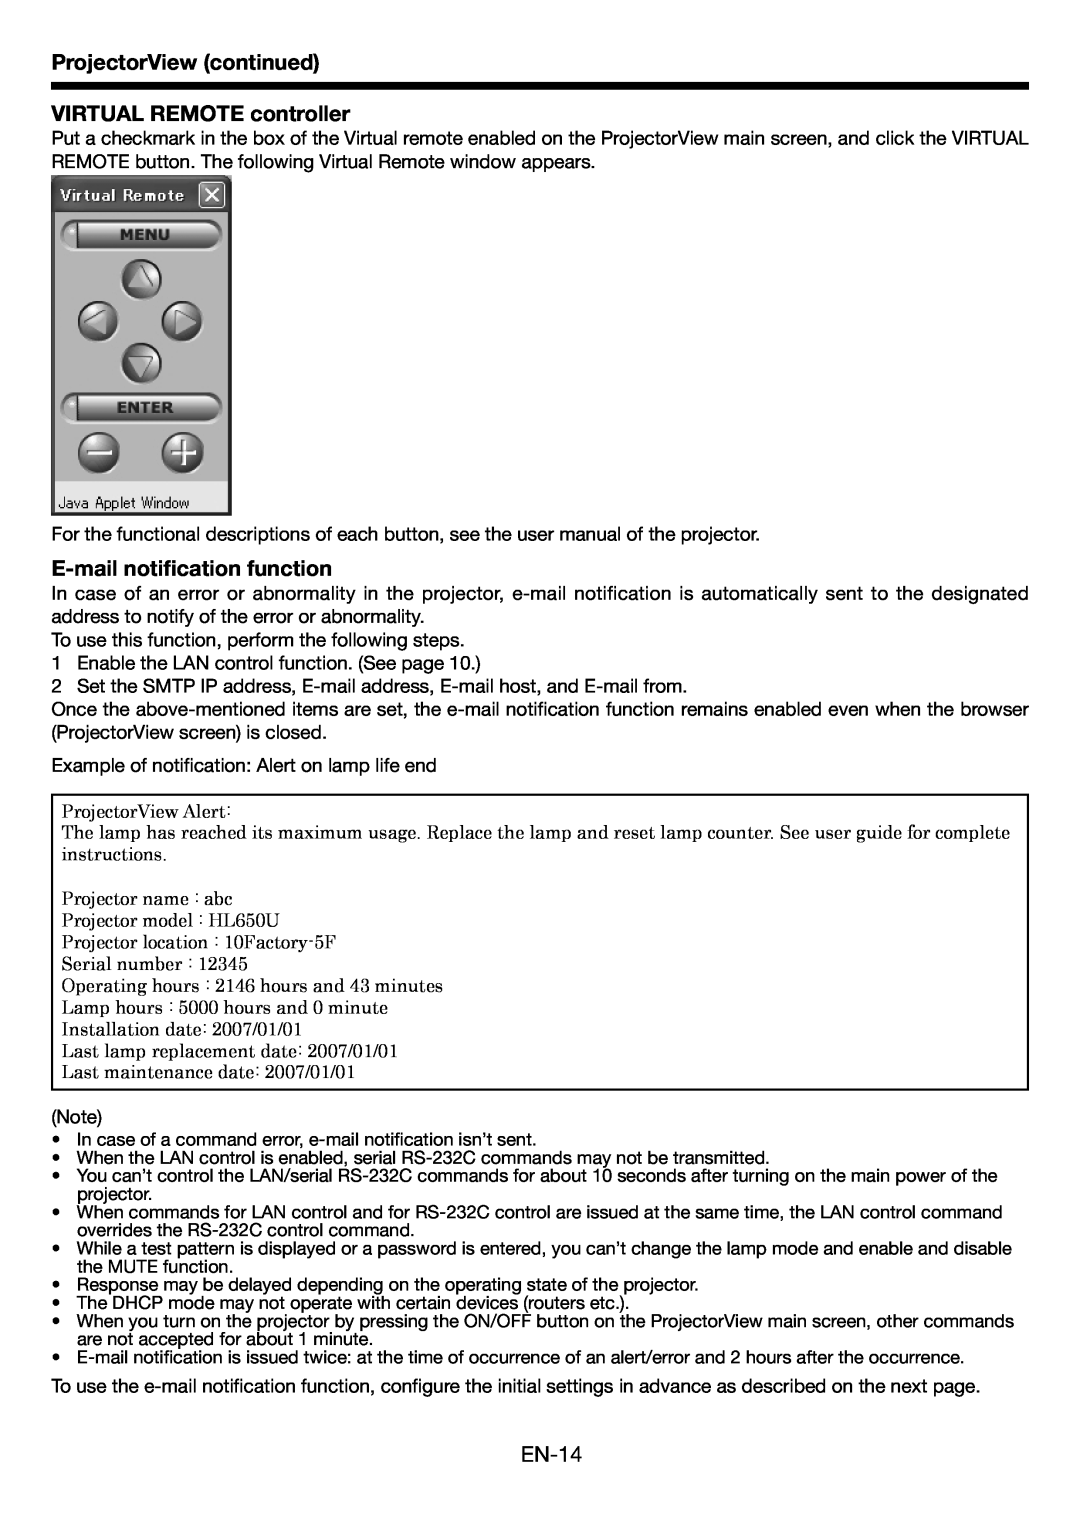 Mitsubishi Electronics HL650U ProjectorView continued VIRTUAL REMOTE controller, E-mail notiﬁcation function, EN-14 